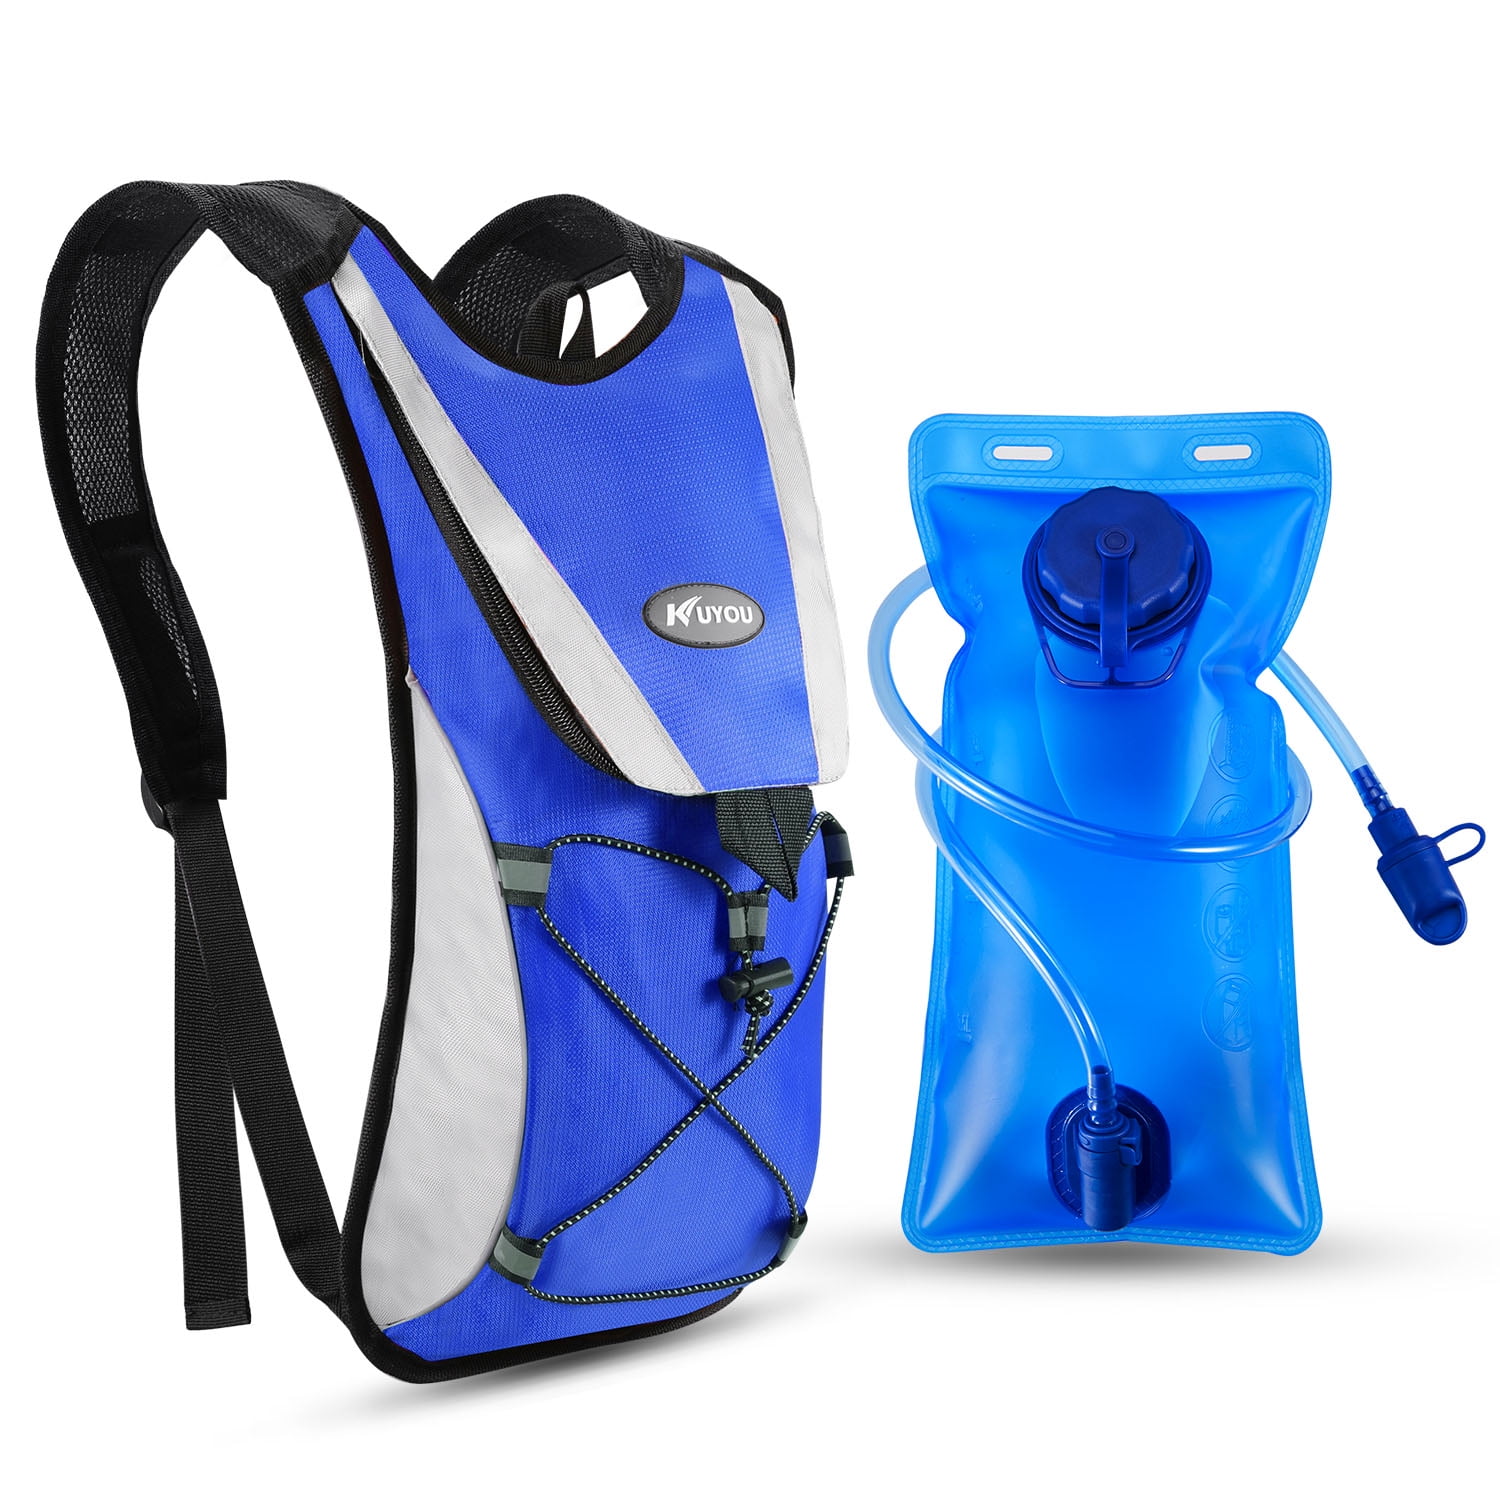 KUYOU Hydration Pack Hydration Backpack with 2L Water Baldder Lightweight Insulated Water Pack for Camping Hiking Running Riding Climbing 